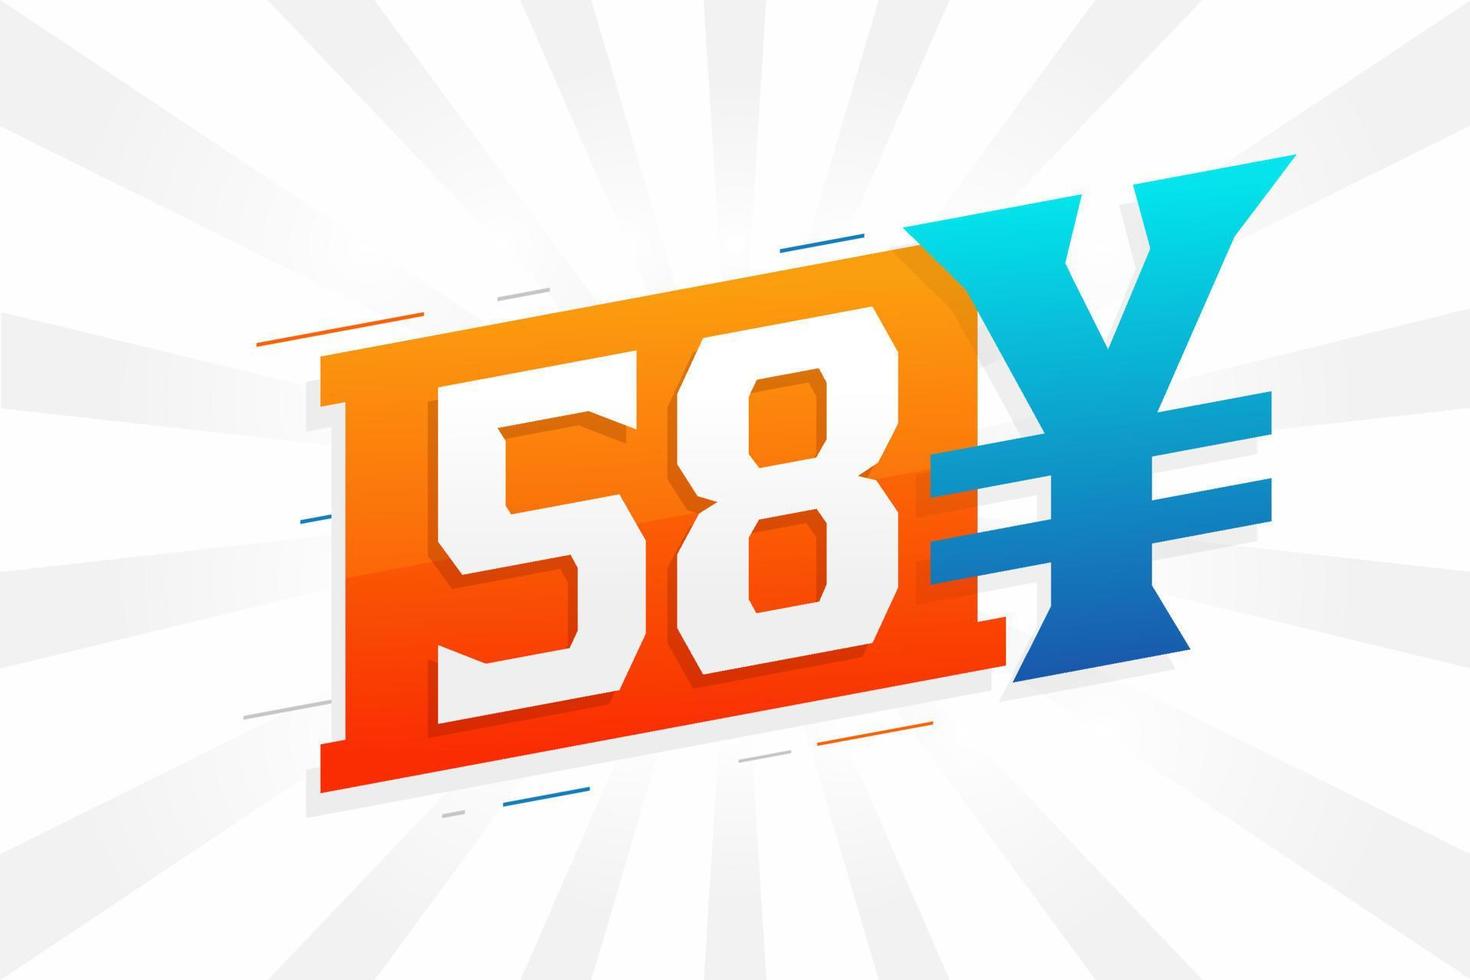 58 Yuan Chinese currency vector text symbol. 58 Yen Japanese currency Money stock vector